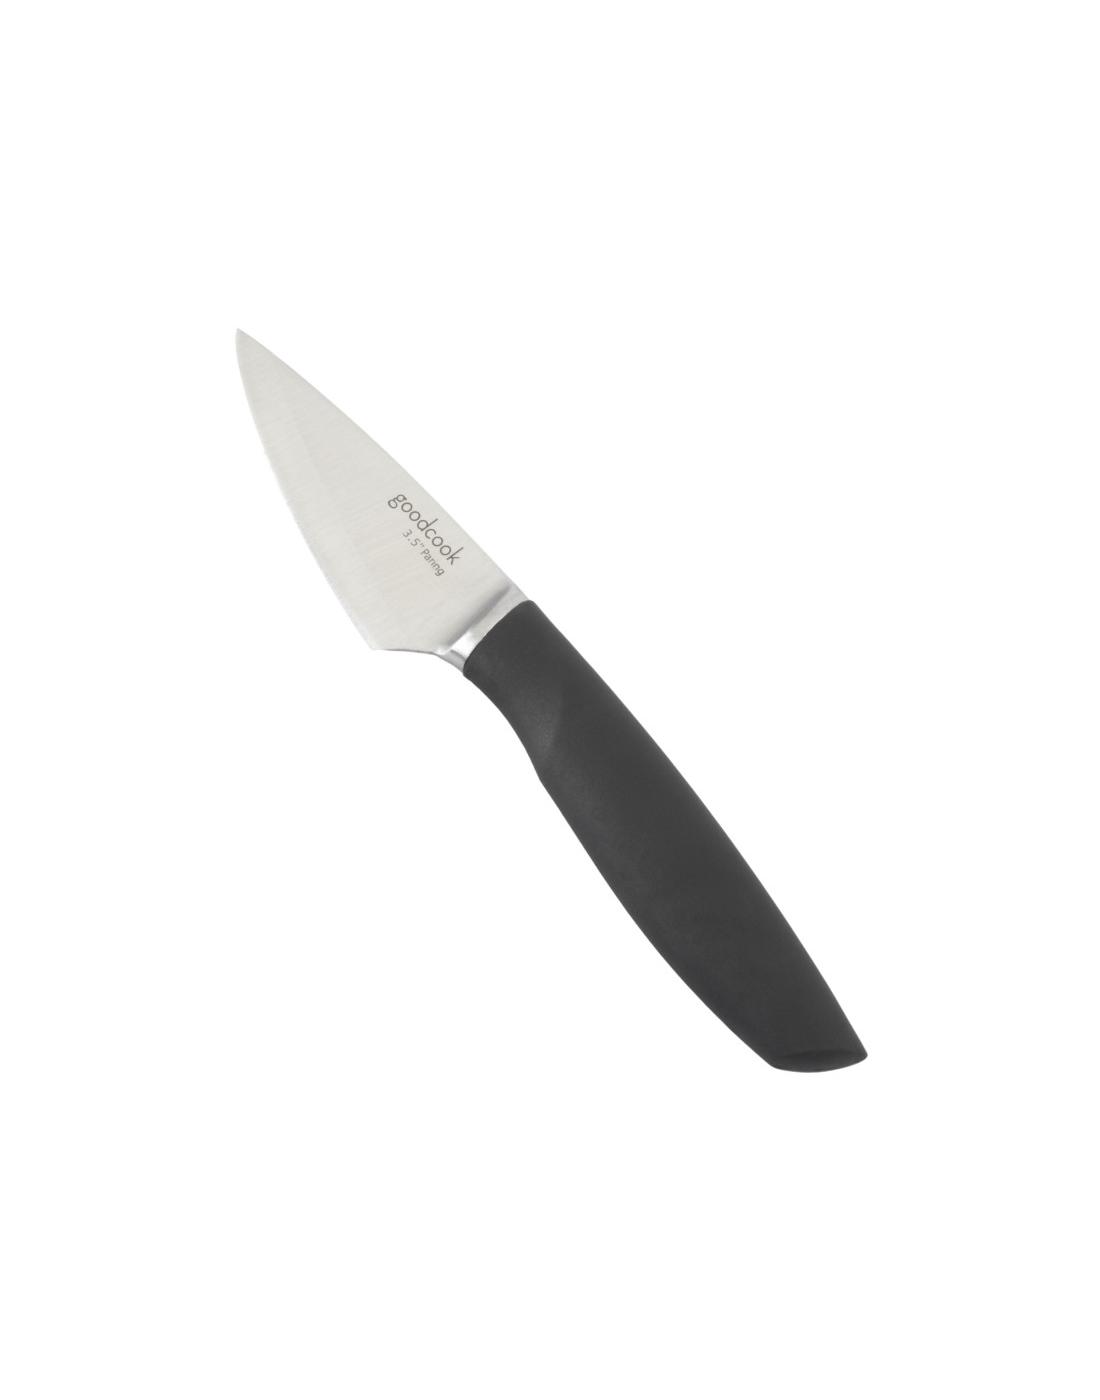 GoodCook Touch Paring Knife; image 2 of 4